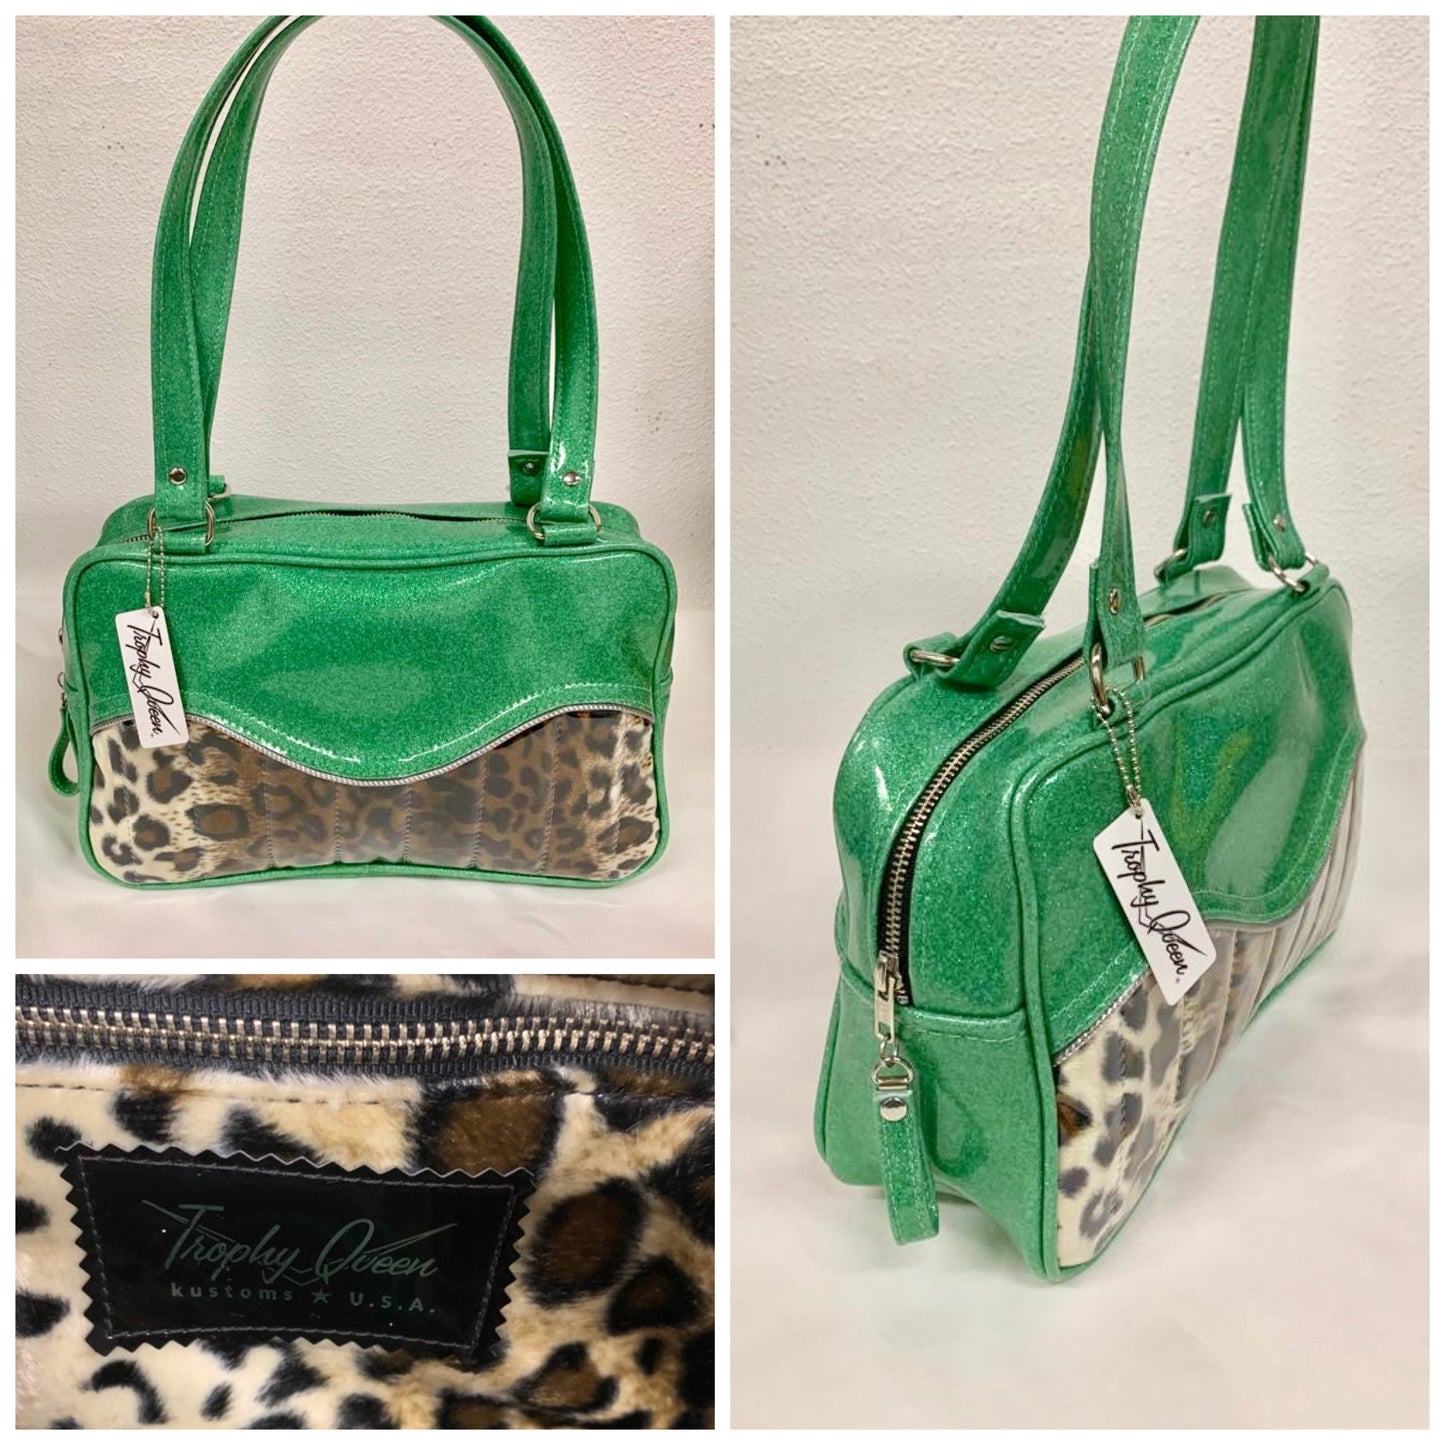 Tuck and Roll Tote Bag - Leopard with Clear Overlay / Sea Foam Green Glitter Vinyl - Leopard Lining